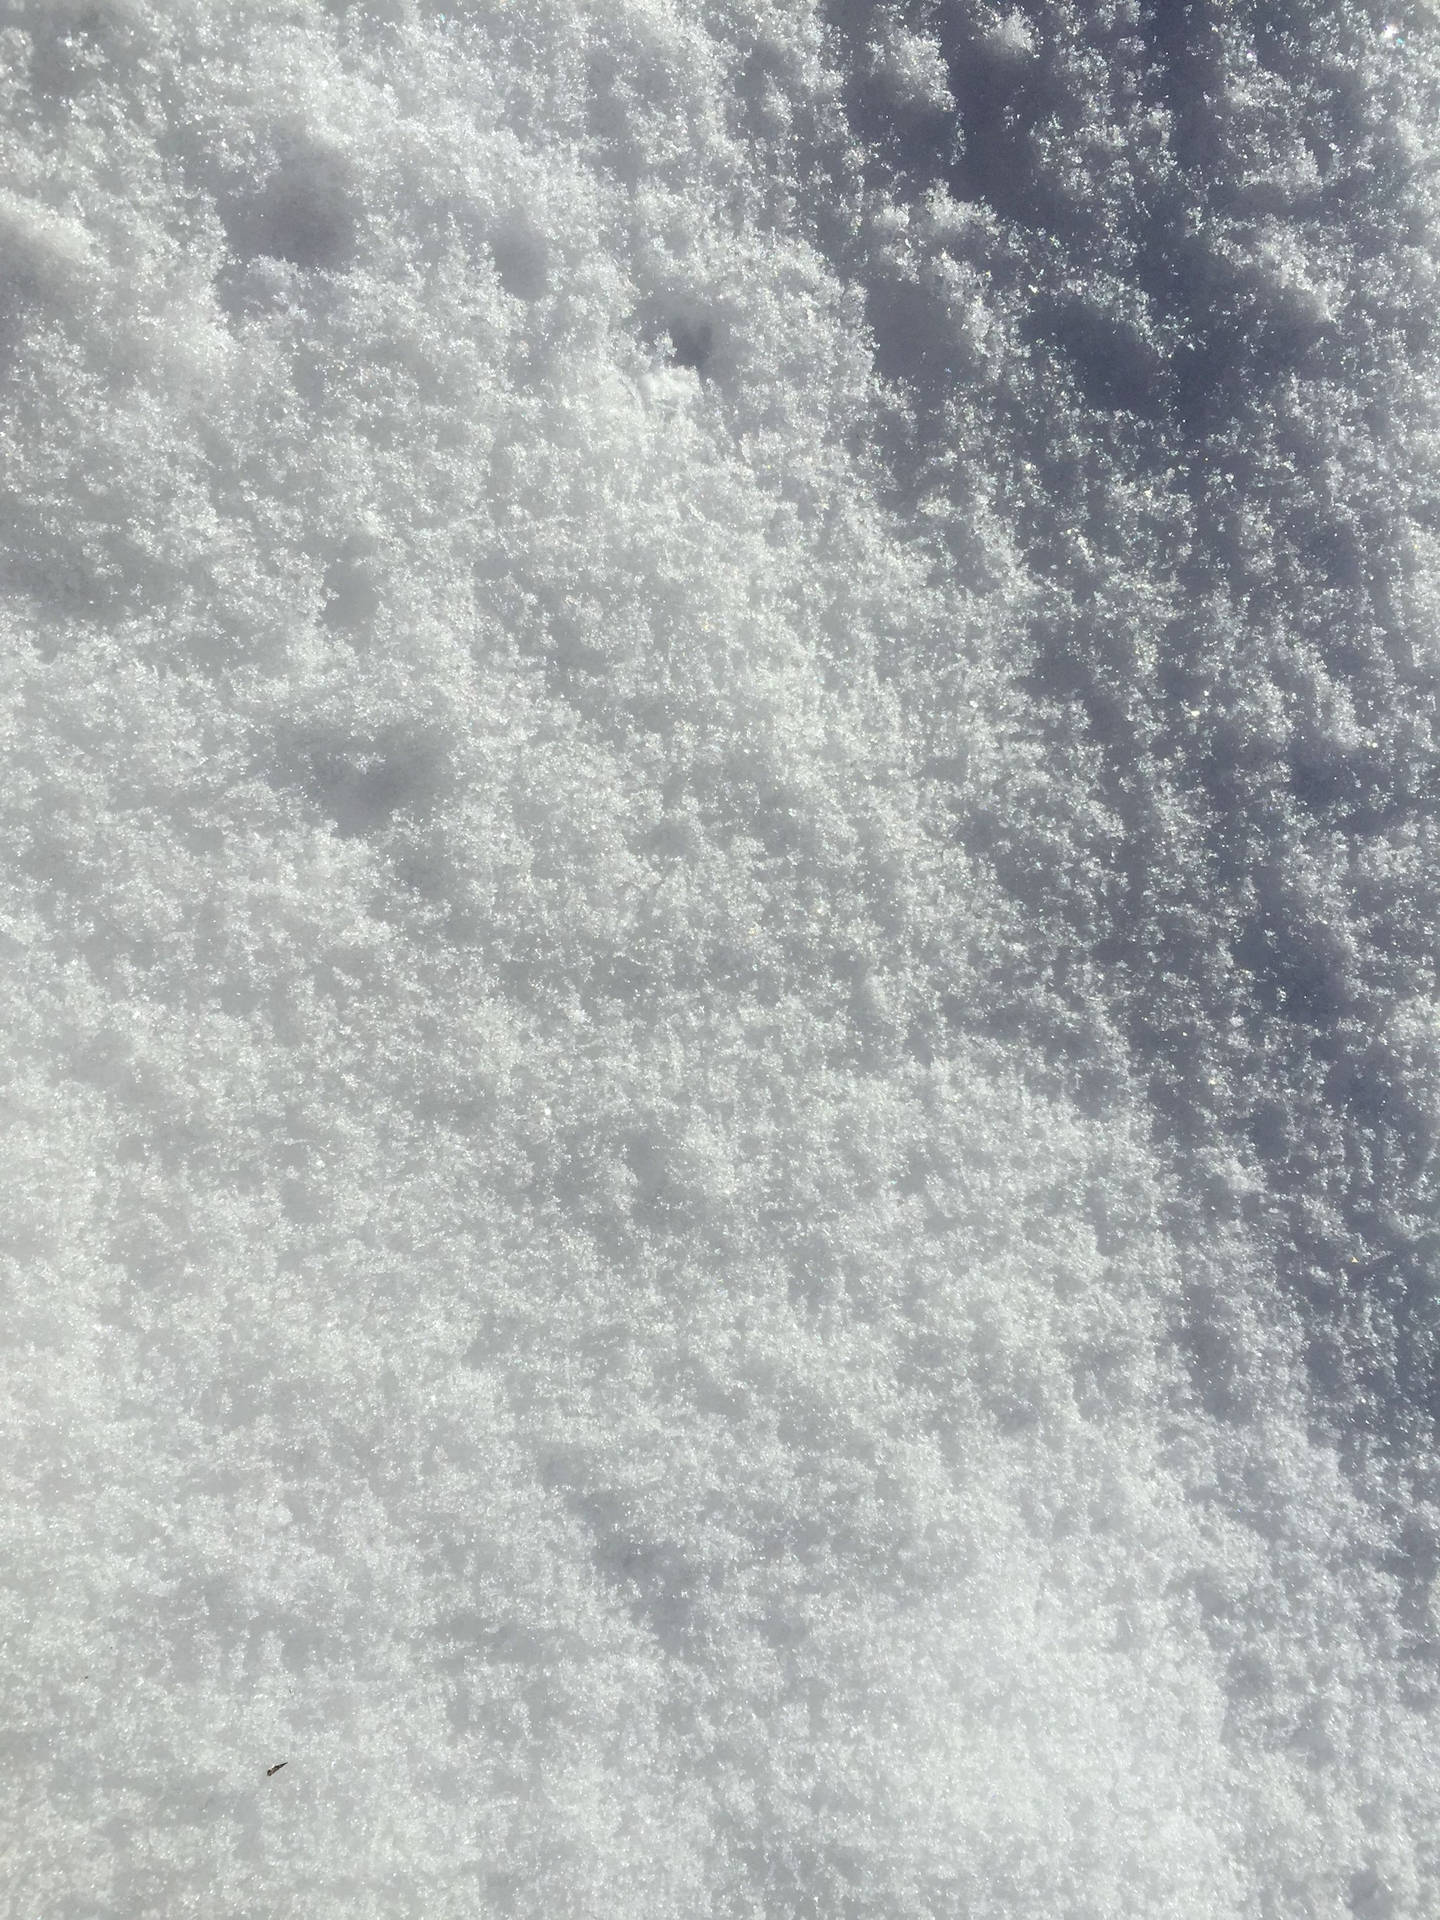 2208X2944 Snow Wallpaper and Background